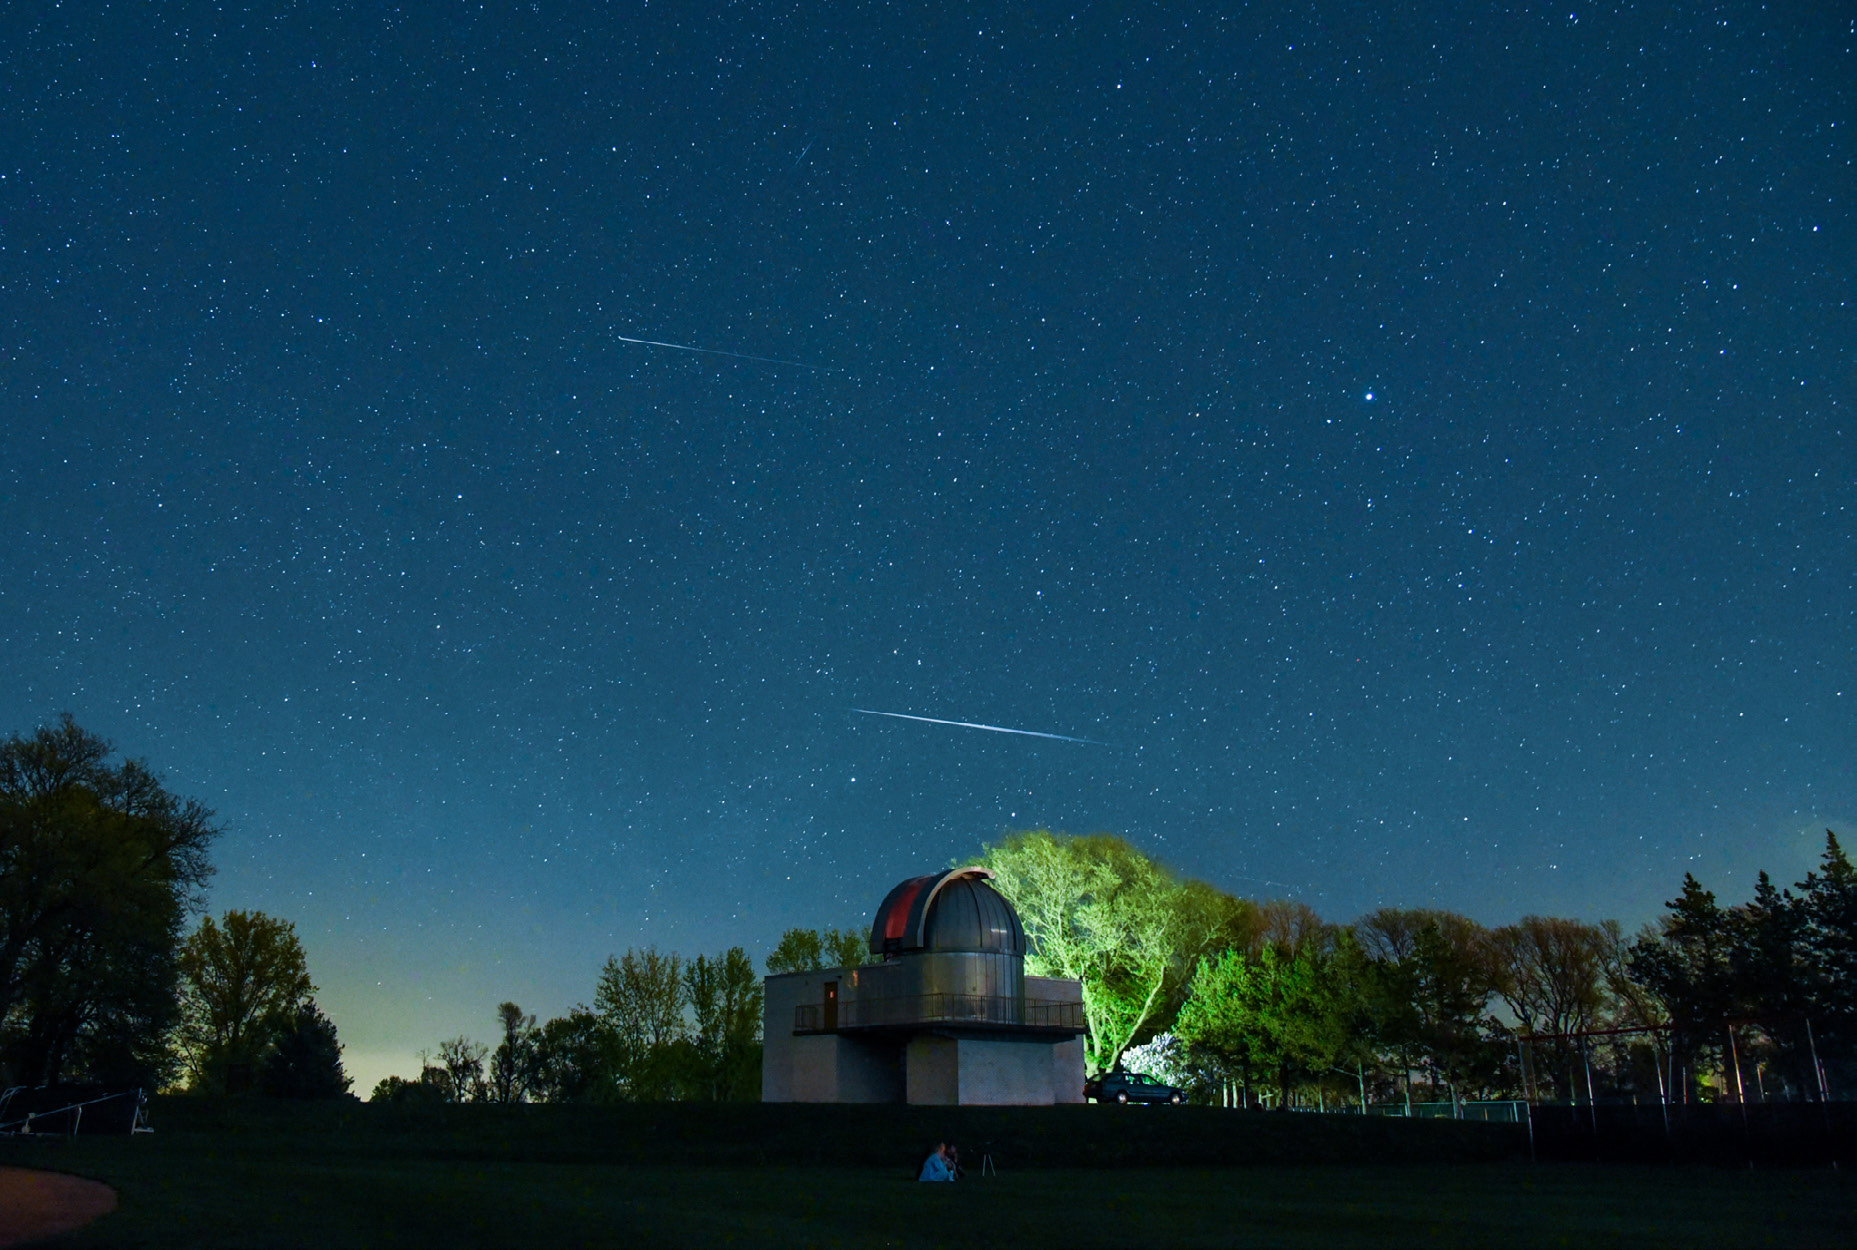 Watching a meteor shower from a field near Grinnell College’s Grant Gale Observatory. Photo by [Scott Lew](https://instagram.com/bellagio3?igshid=YmMyMTA2M2Y=)